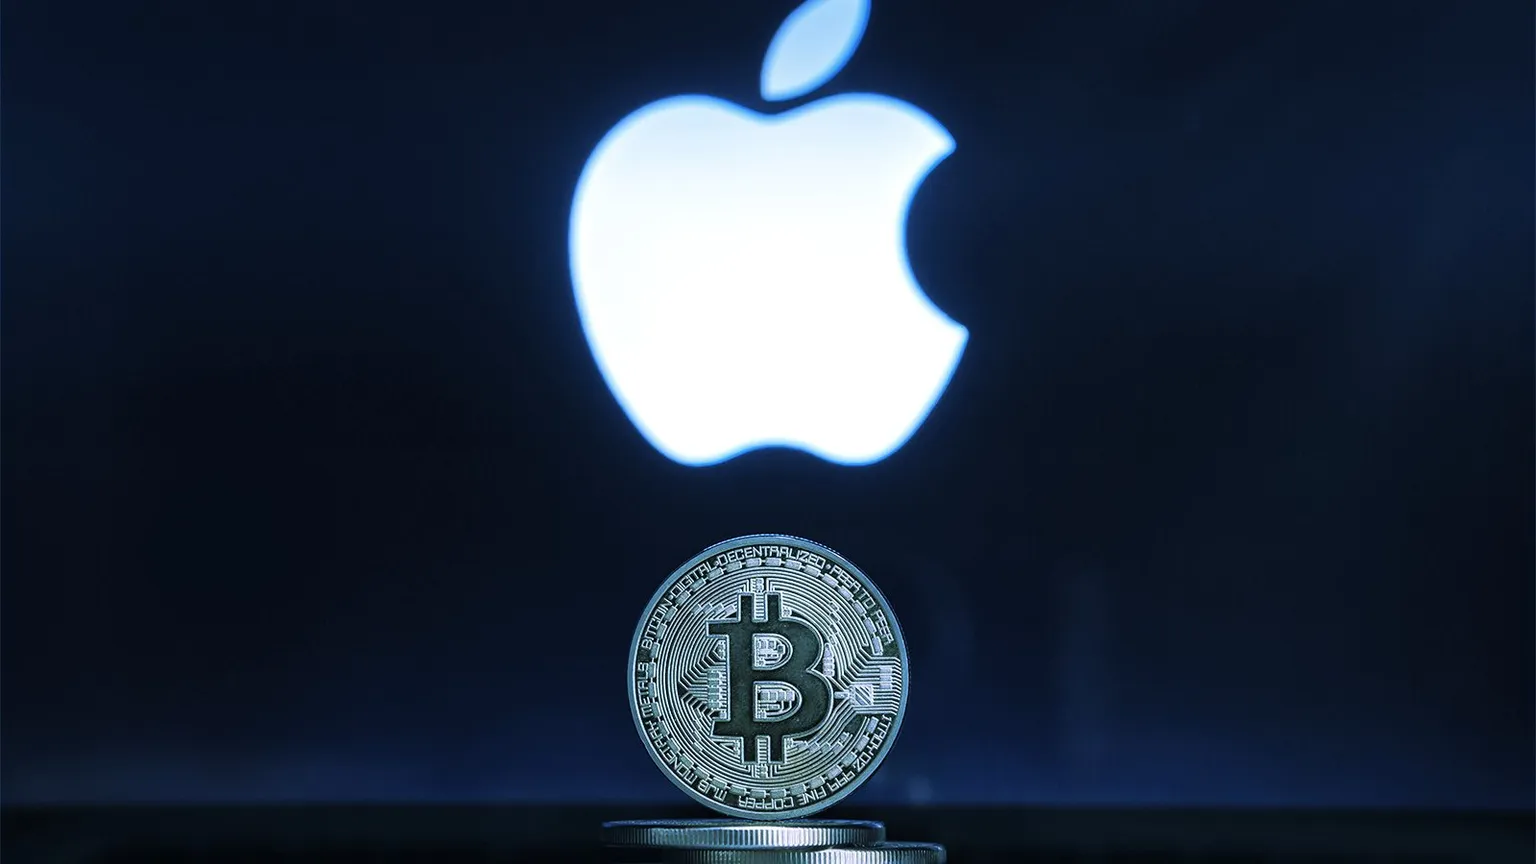 Tech stocks like Apple and Bitcoin are rising in unison. IMAGE: Shutterstock